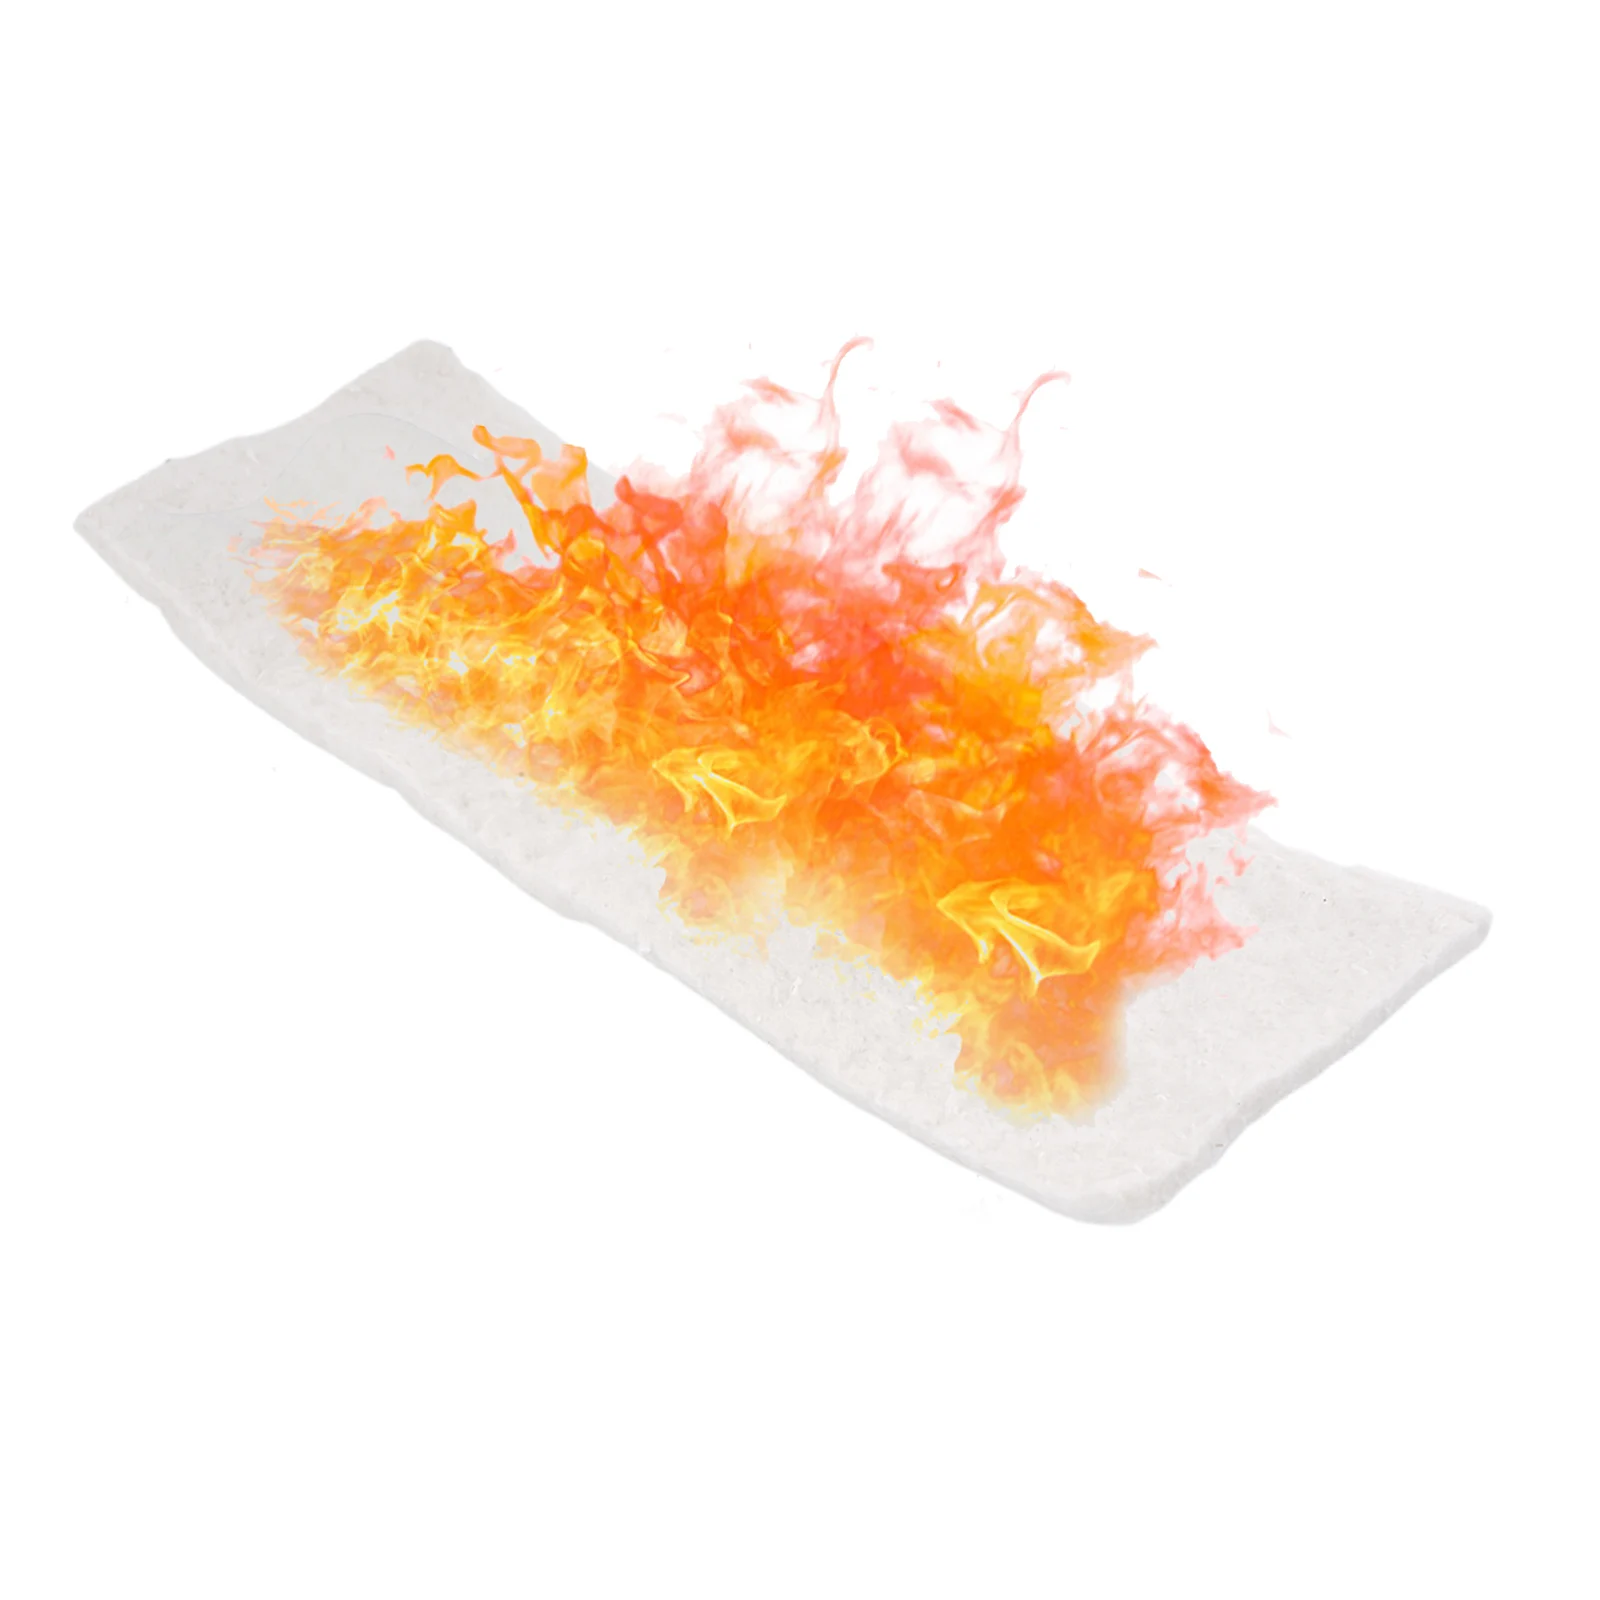 

Home Office Room Blanket Fireplace 1206 ℃ 1Pcs CMS Bio-fibres Environmentally Increases Safety Increases Savings